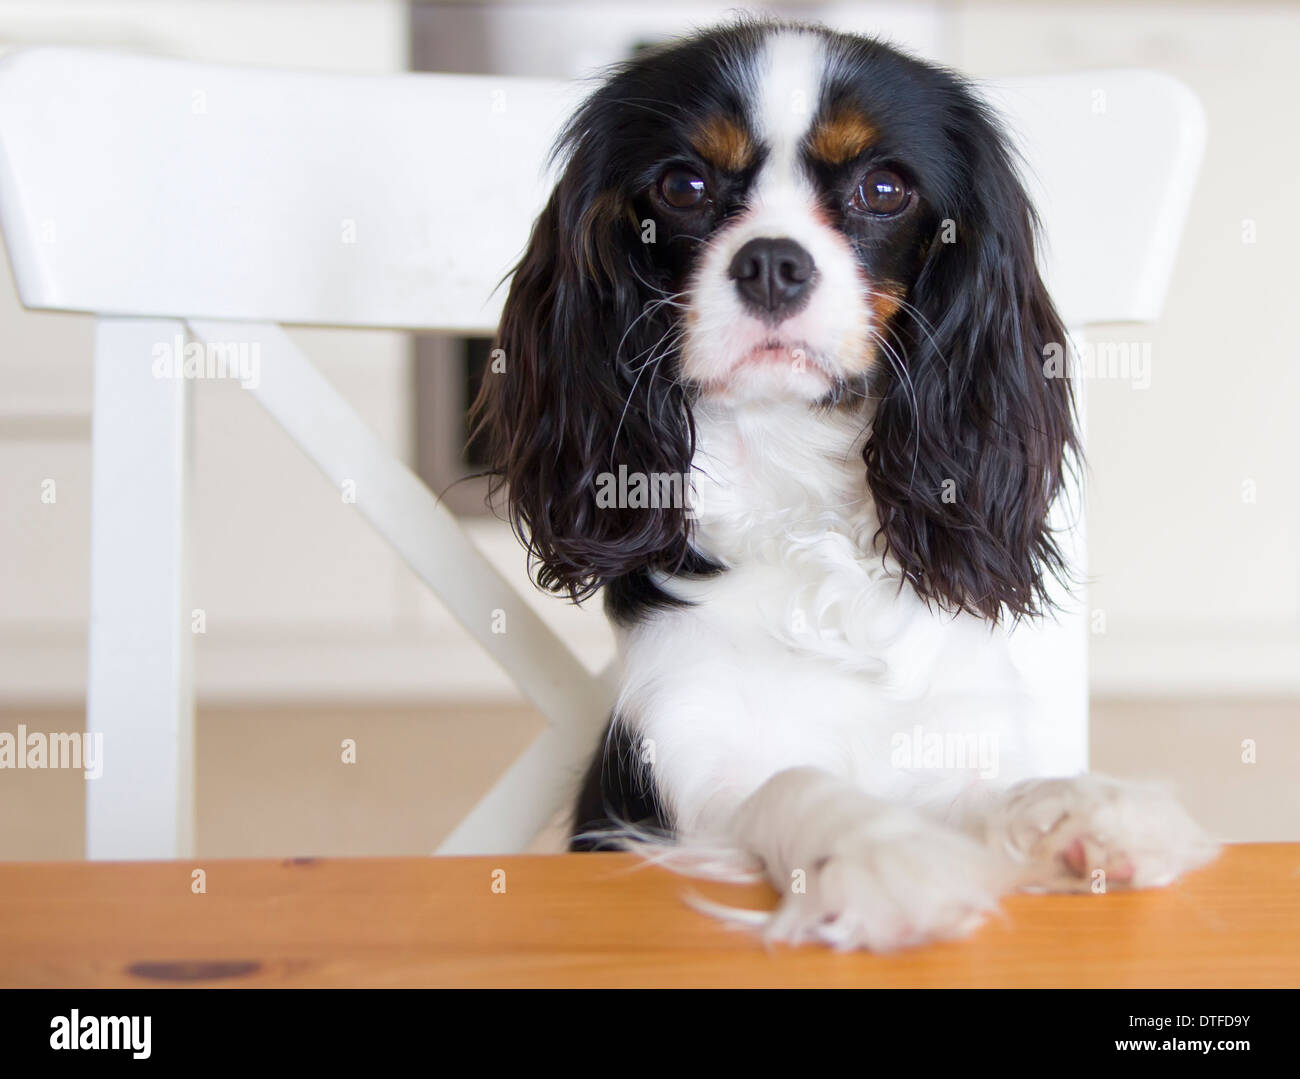 cute dog begging for food at the kitchen table Stock Photo